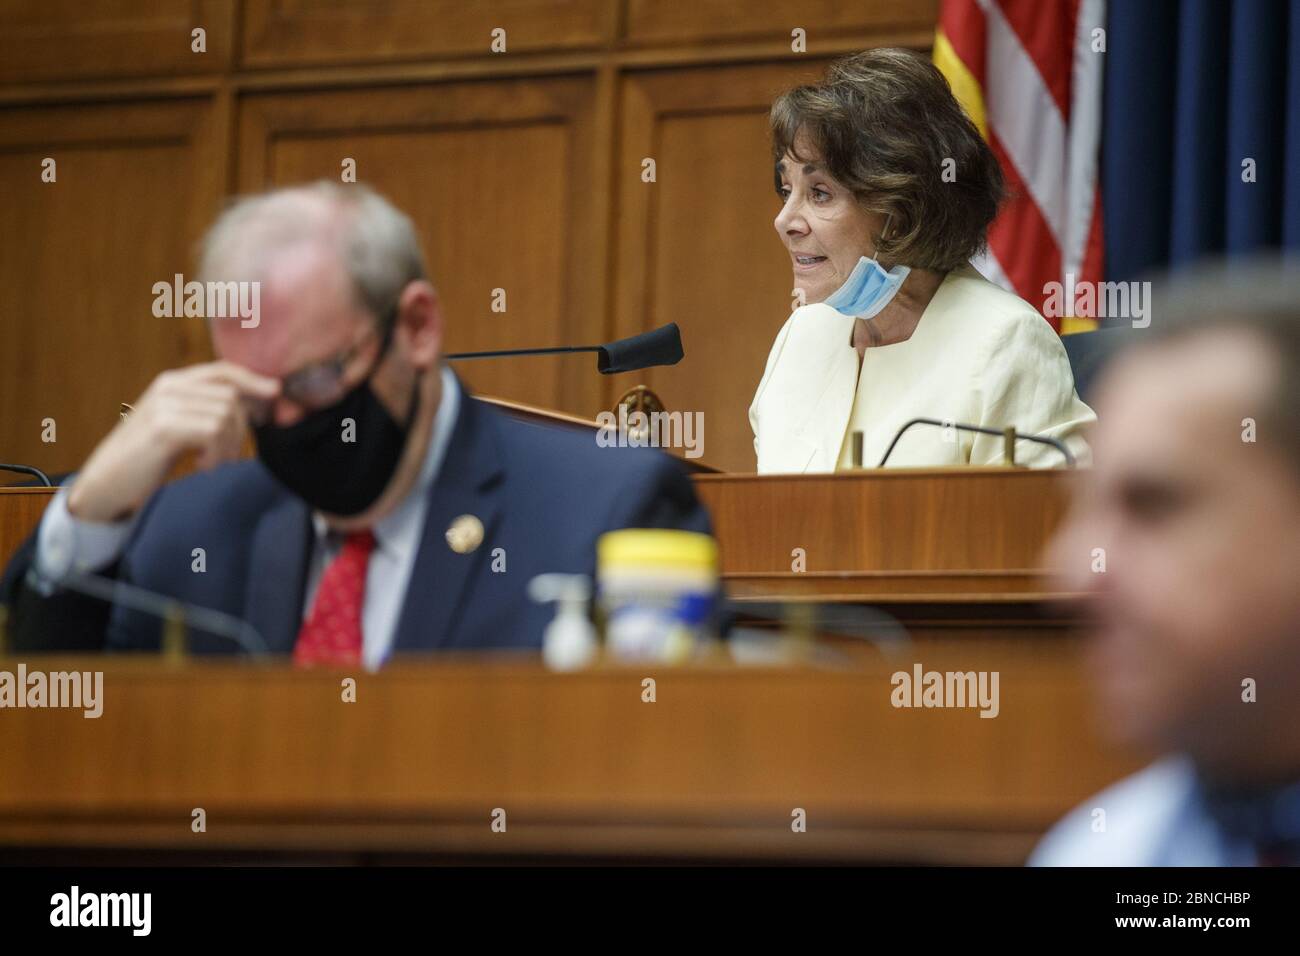 Washington, United States. 14th May, 2020. Committee Chairwoman Anna Eshoo delivers opening remarks during the House Energy and Commerce Subcommittee on Health hearing to discuss protecting scientific integrity in response to the coronavirus outbreak on Capitol Hill in Washington, DC on Thursday, May 14, 2020. Pool Photo by Shawn Thew/UPI Credit: UPI/Alamy Live News Stock Photo